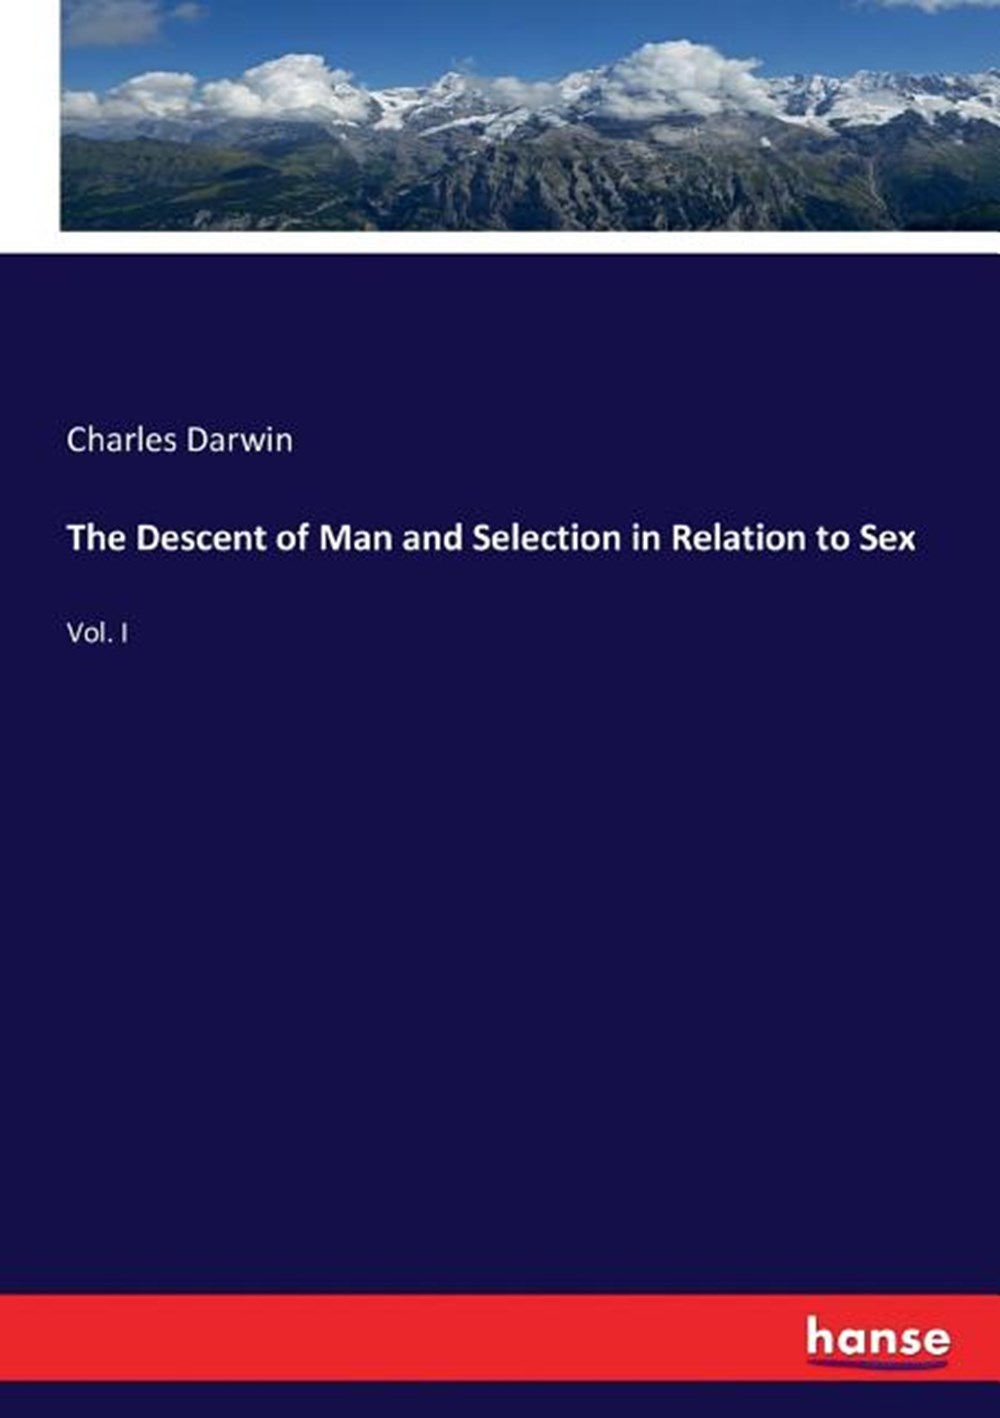 Descent of Man and Selection in Relation to Sex: Vol. I